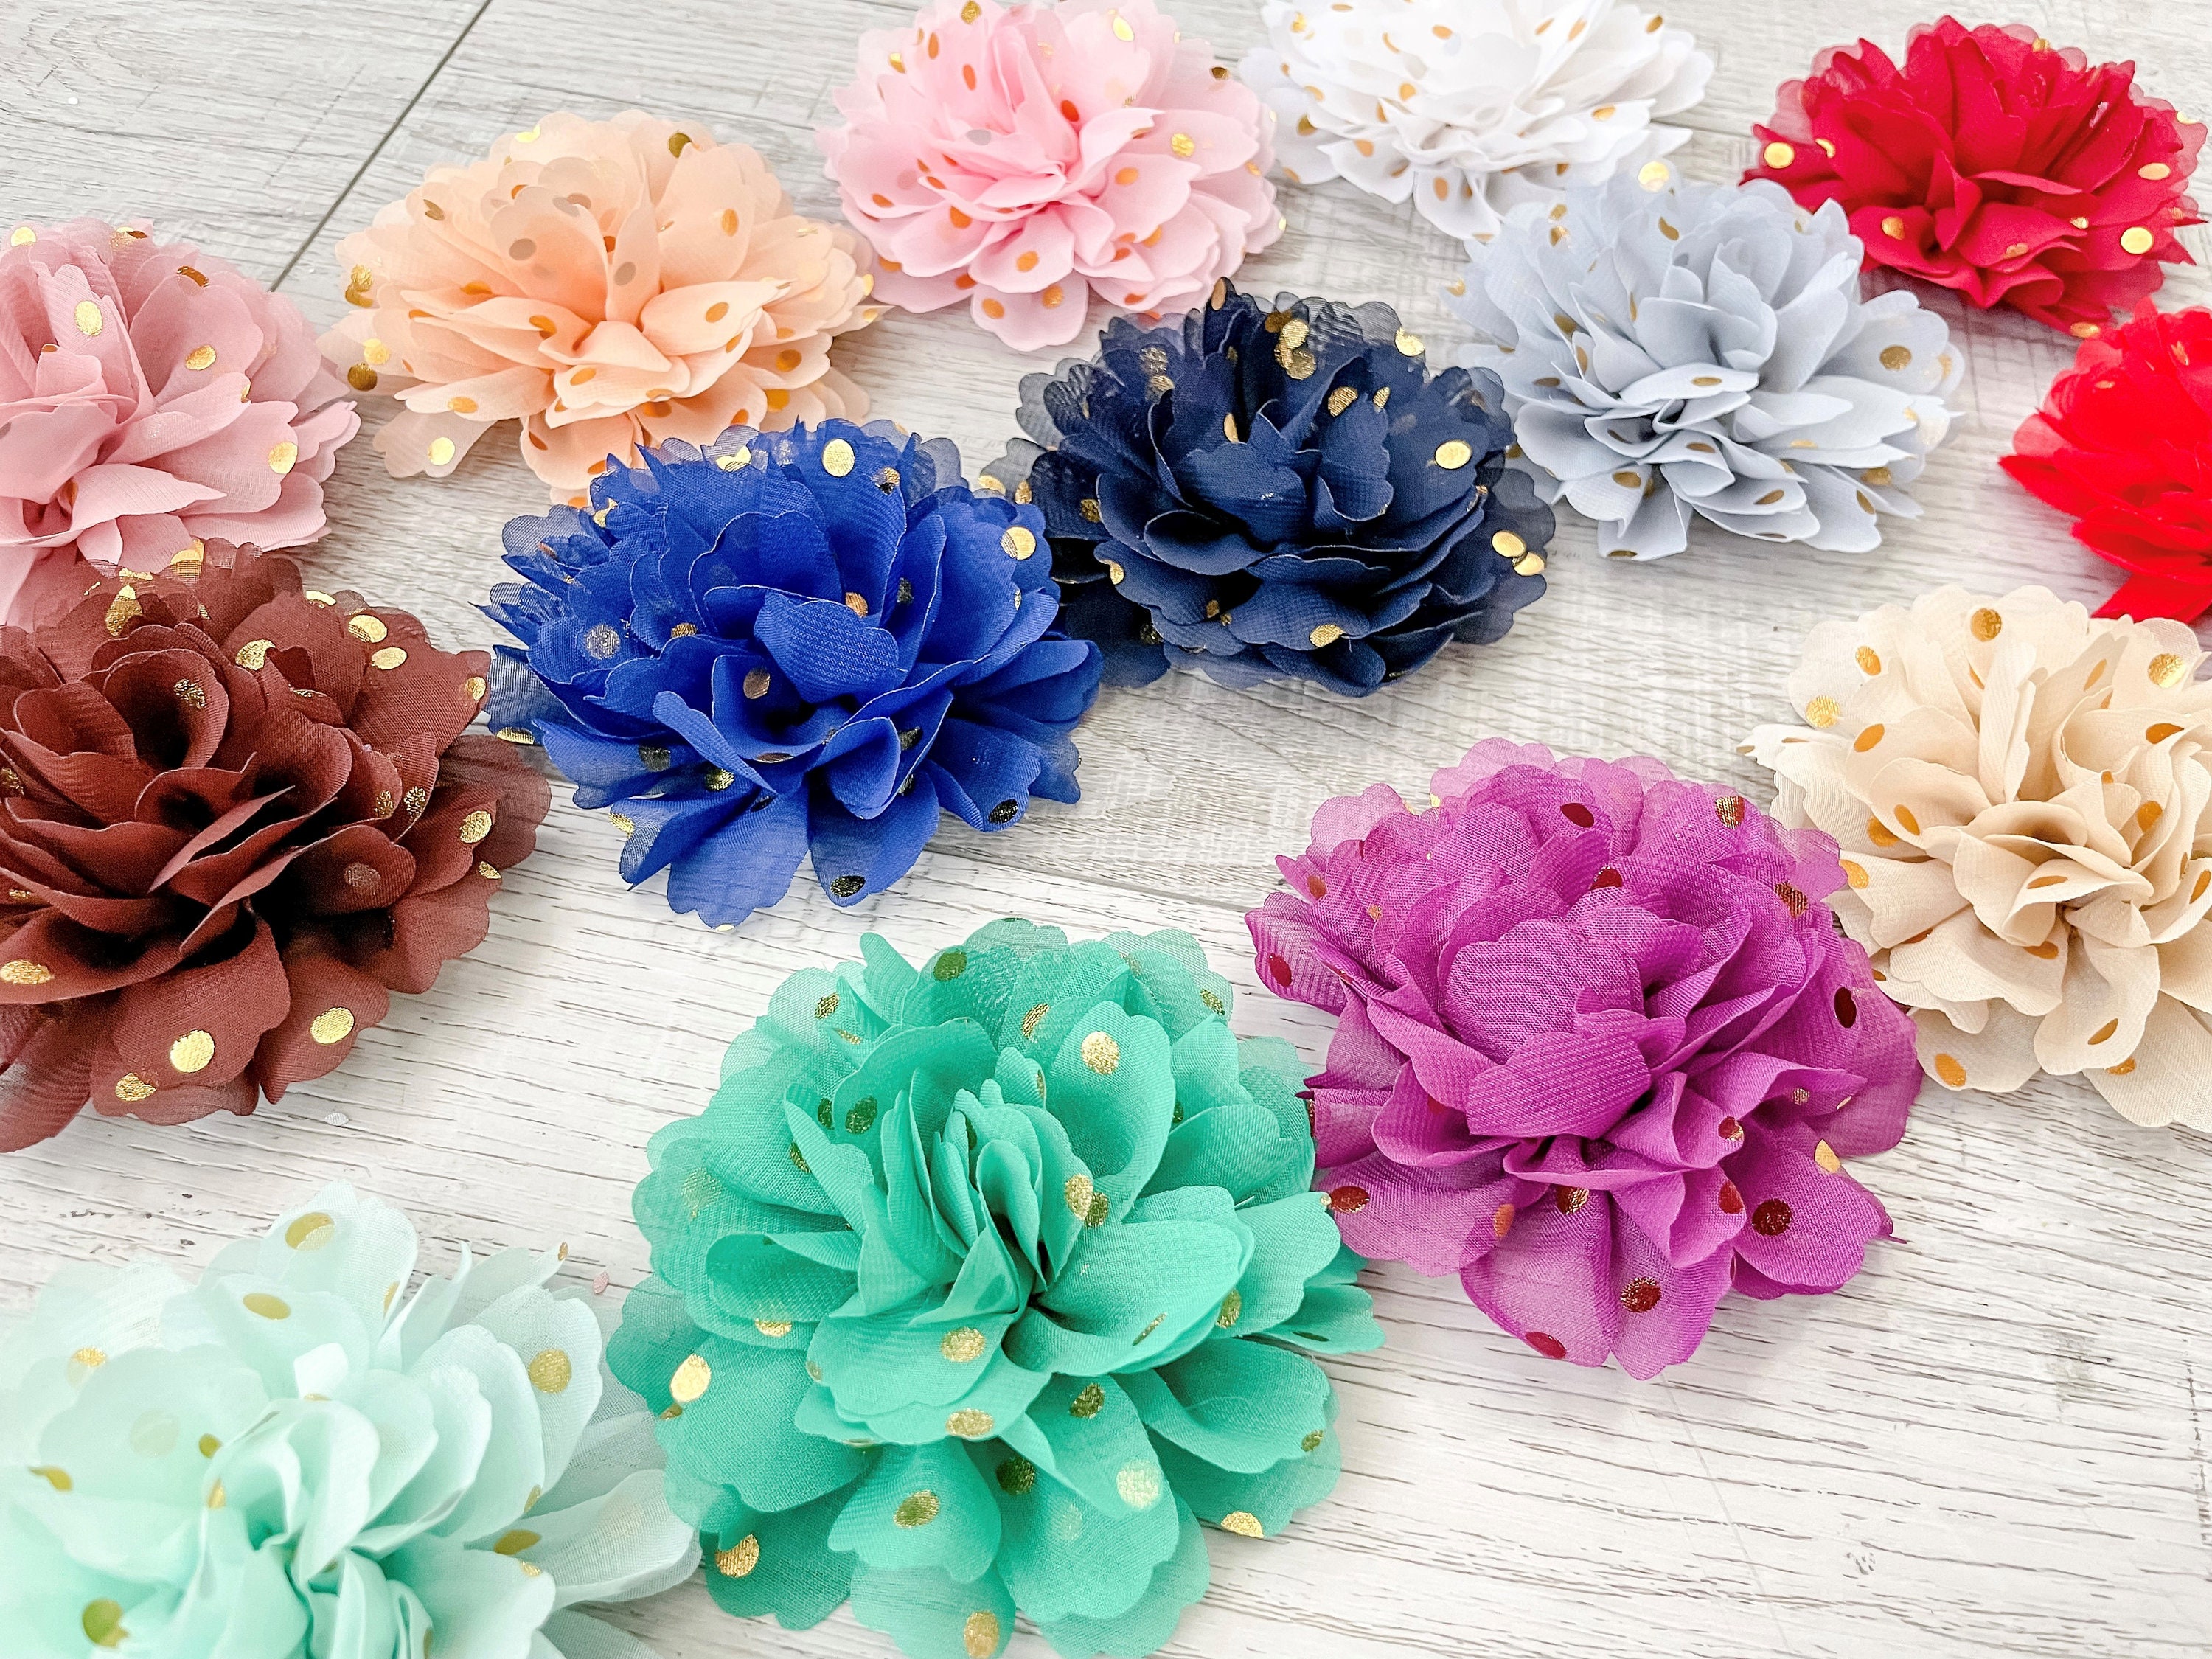 Uxcell 2.8 Chiffon Flowers Mesh Fabric Flowers Sewing Fabric Appliques  Peach 10 Pcs 